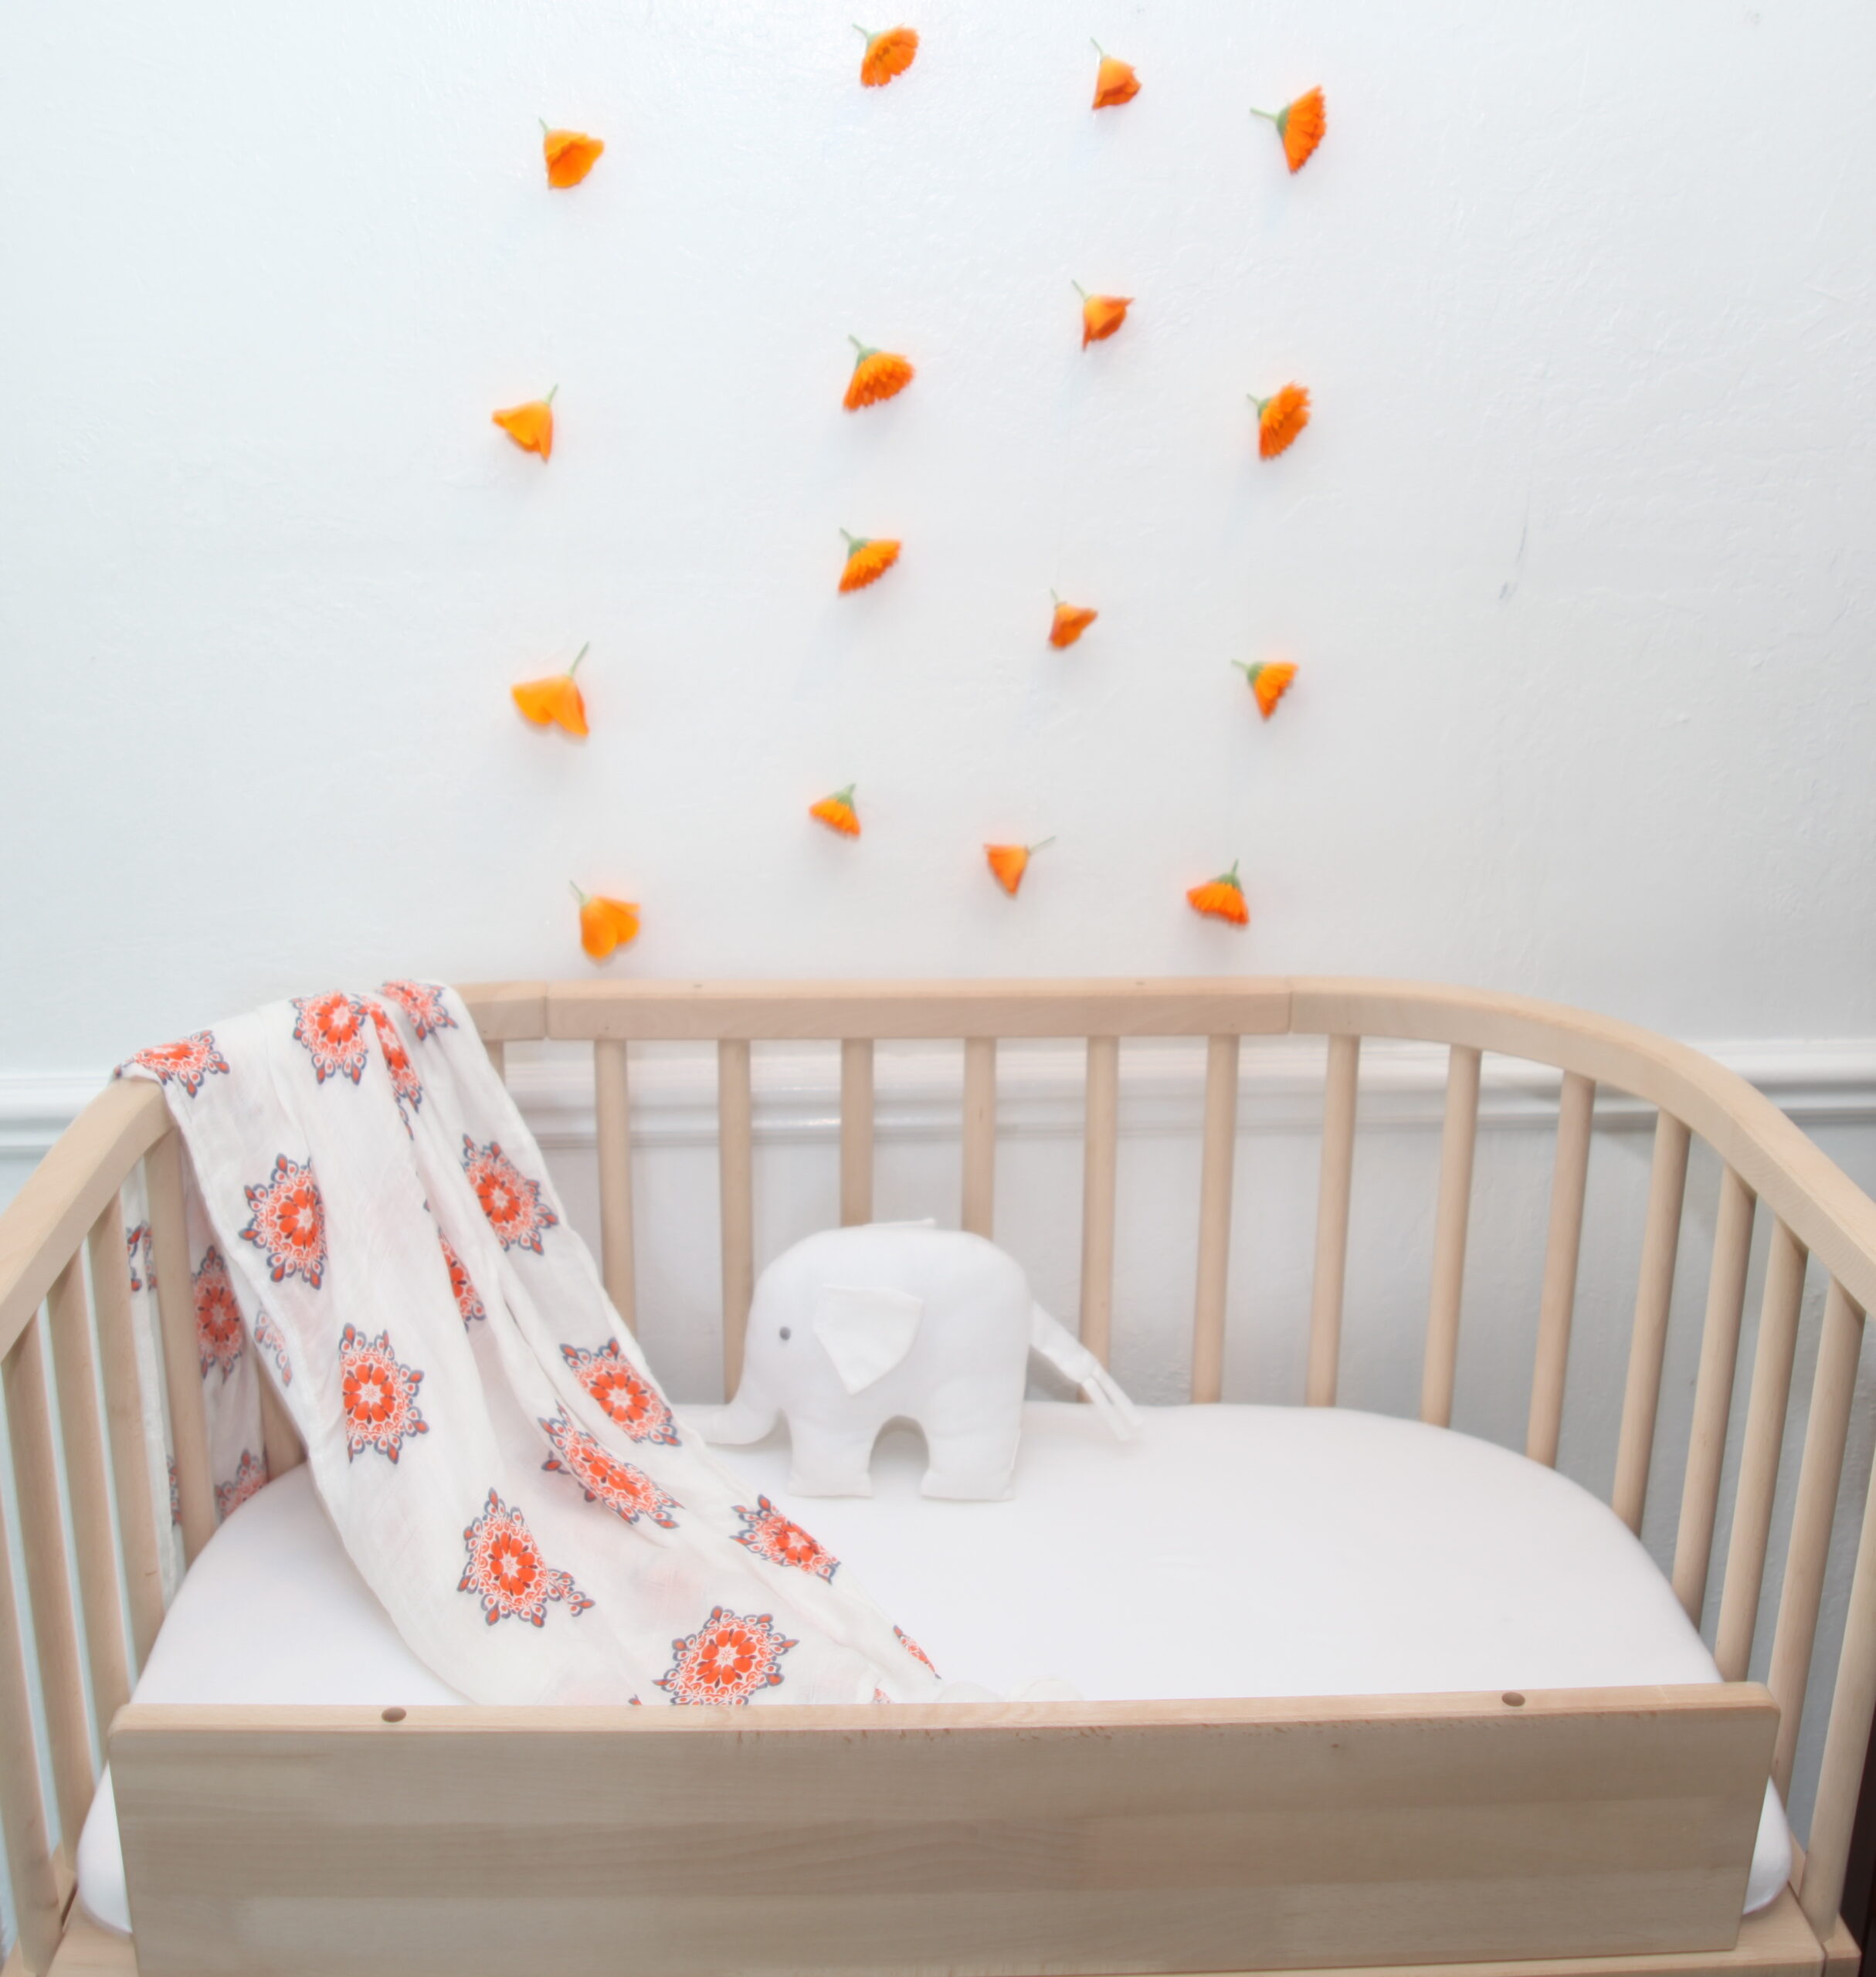 babybay Unboxing: How to Prep Your Bedside Sleeper For Your Little One’s Arrival